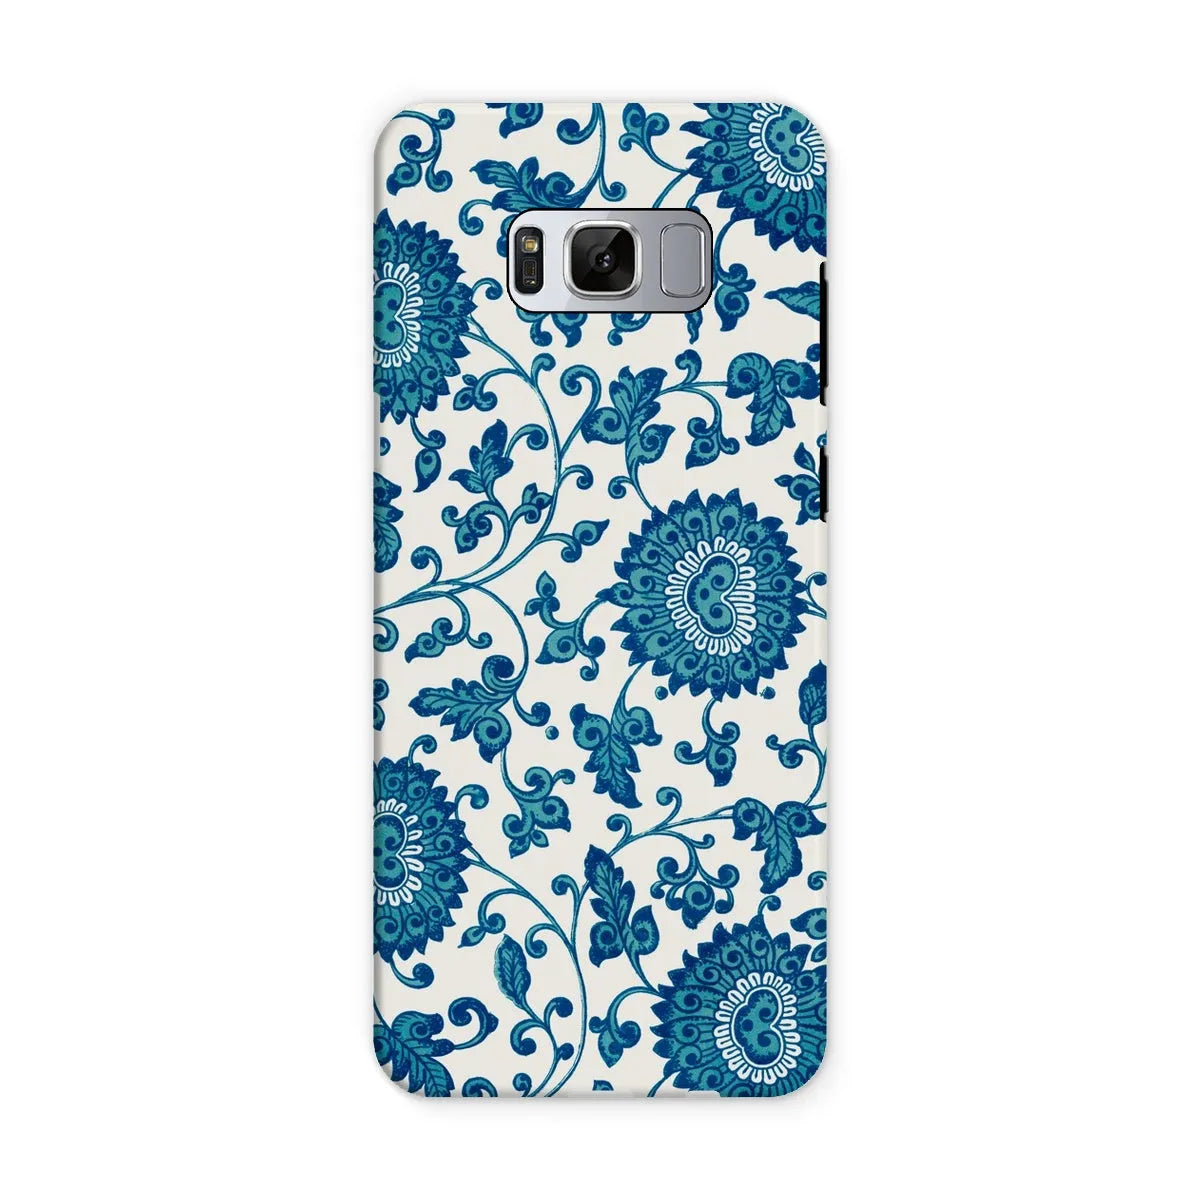 Blue And White Floral Aesthetic Art Phone Case - Owen Jones - Samsung Galaxy S8 / Matte - Mobile Phone Cases